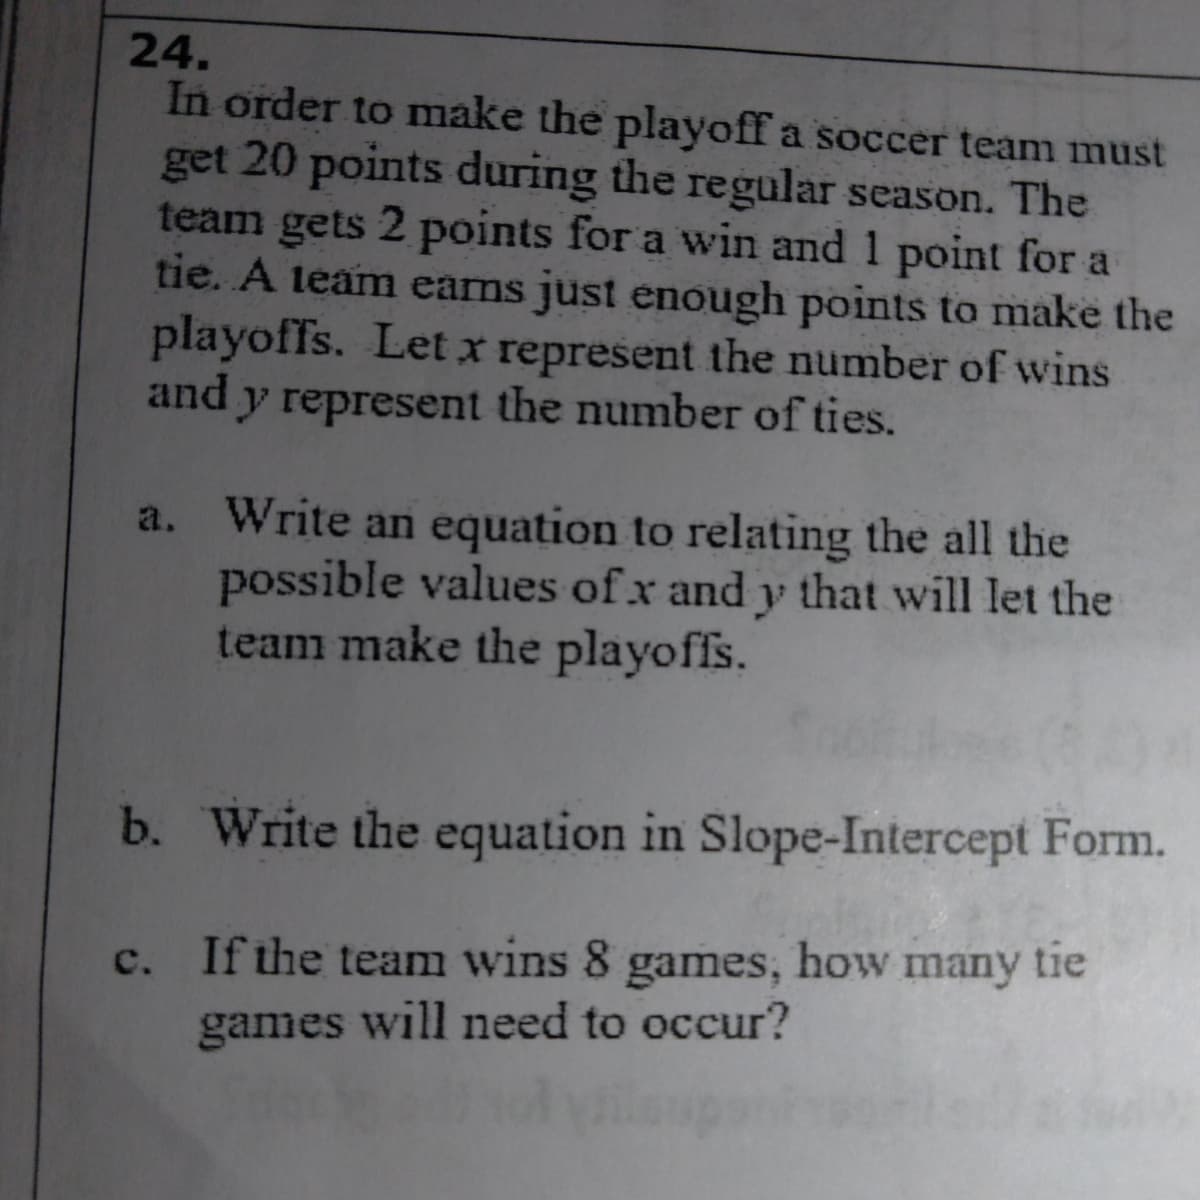 24.
In order to make the playoff a soccer team must
get 20 points during the regular season. The
team gets 2 points for a win and 1 point for a
tie. A team eams just enough points to make the
playoffs. Let x represent the number of wins
and y represent the number of ties.
a. Write an equation to relating the all the
possible values of x and y that will let the
team make the playoffs.
b. Write the equation in Slope-Intercept Form.
c. If the team wins 8 games, how many tie
games will need to occur?
